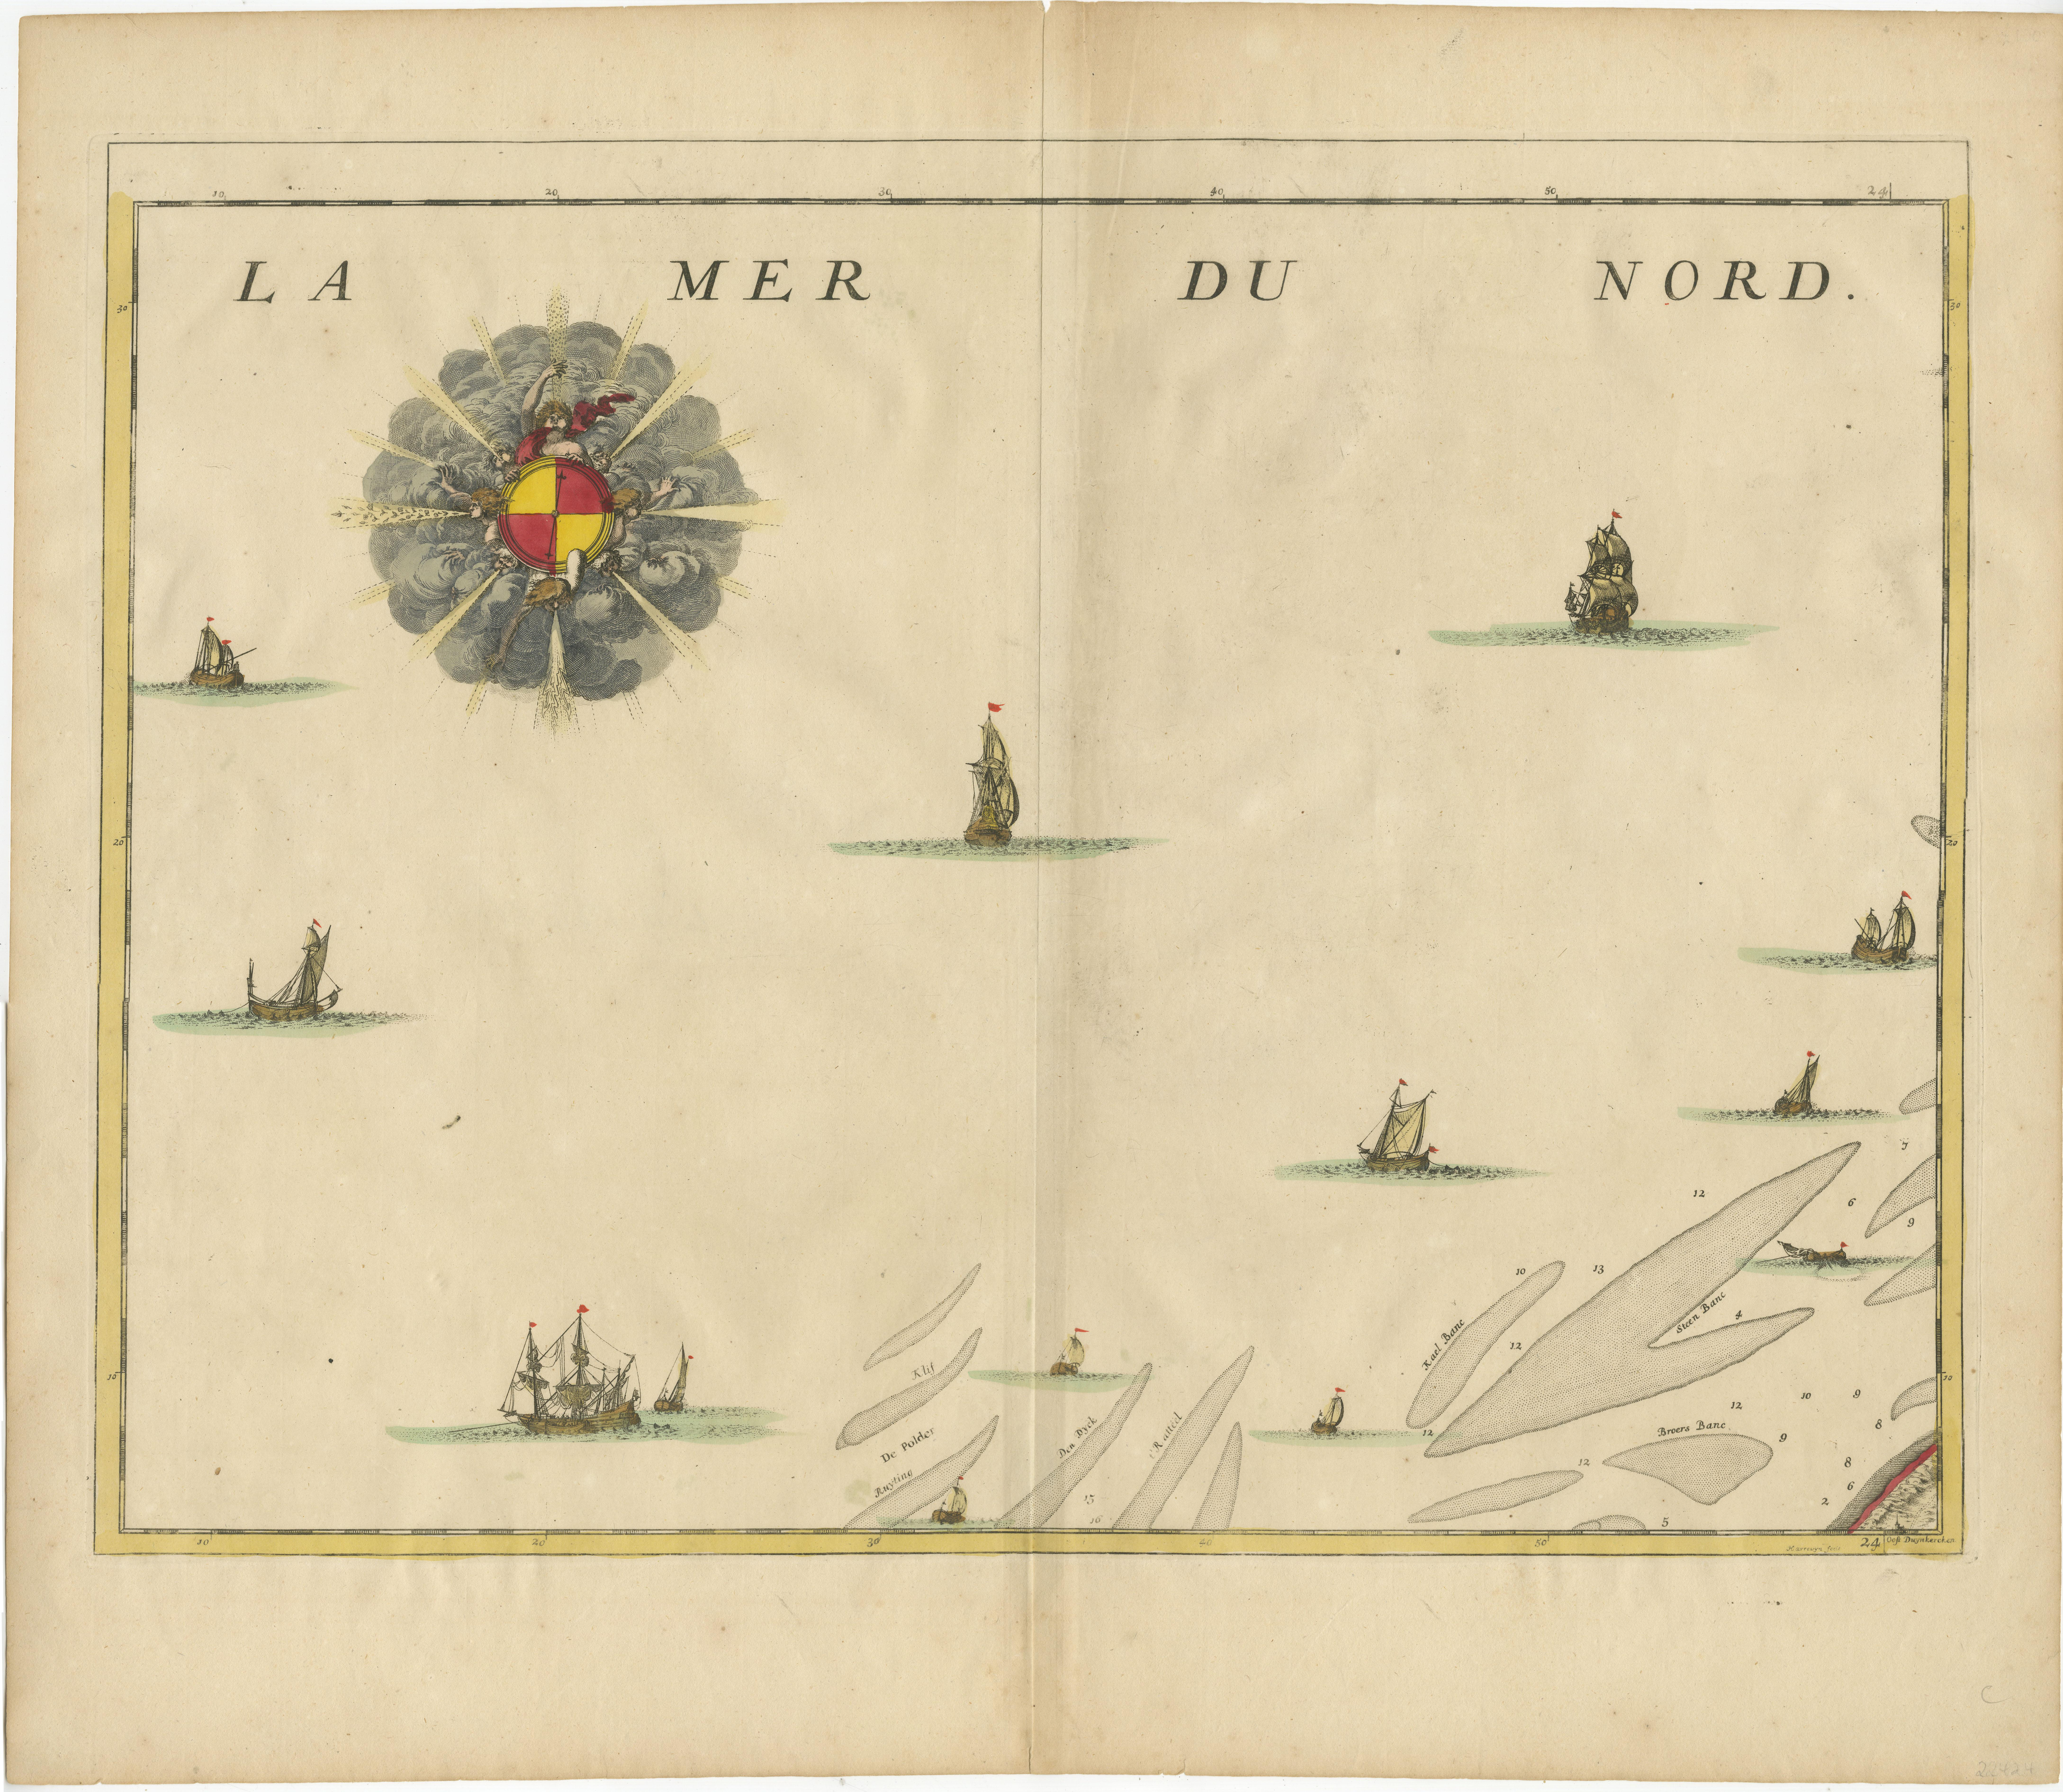 Untitled map of the North Sea, top left a large compass rose, bottom right Dunkirk (Duinkerke / Dunkerque), France. Part of a bundled collection of plans of battles and cities renowned in the Spanish succession war. Engraved by J. Harrewijn,